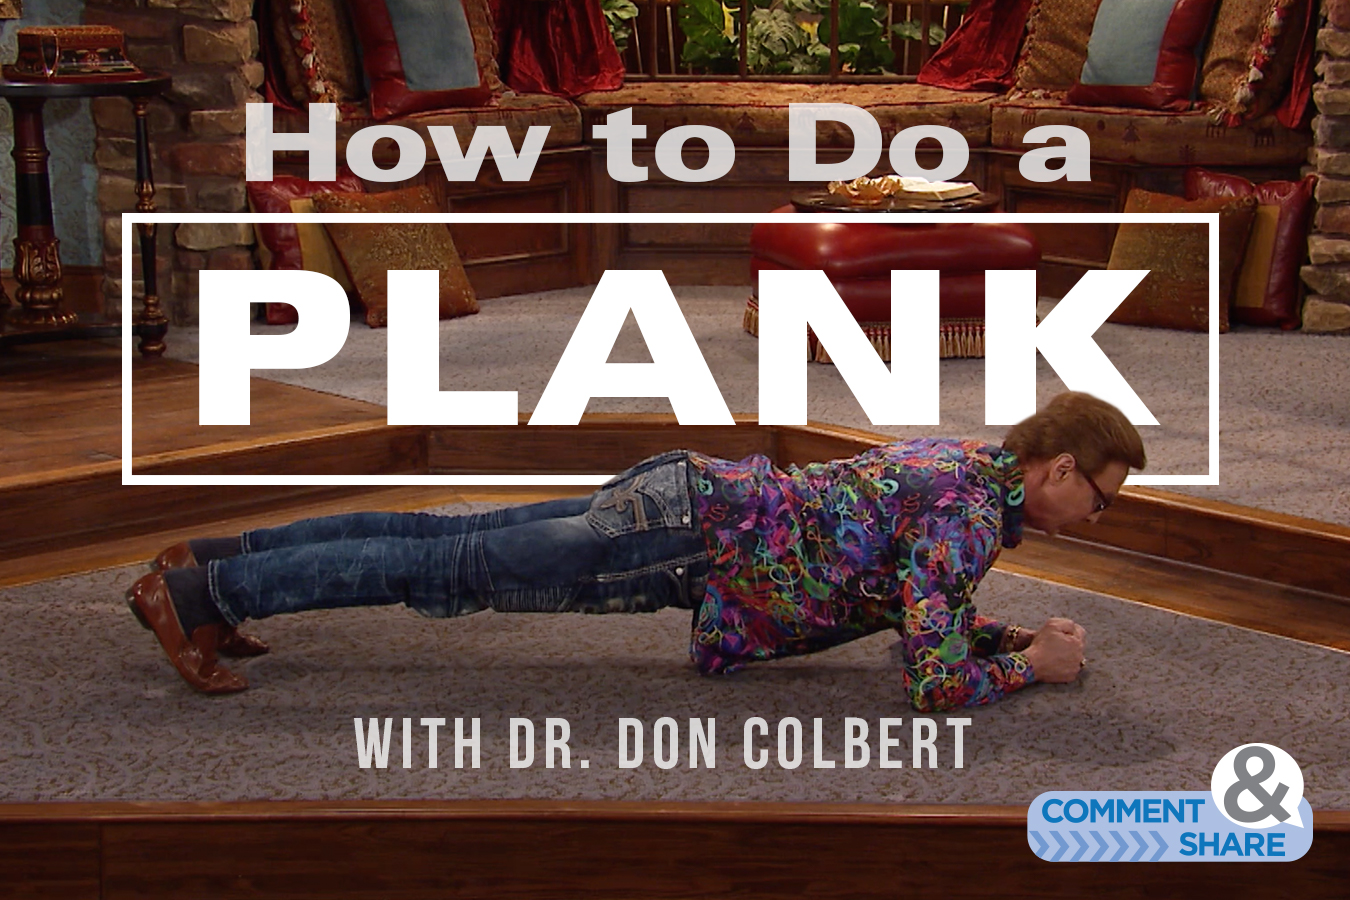 How to do a plank with Dr. Don COlbert